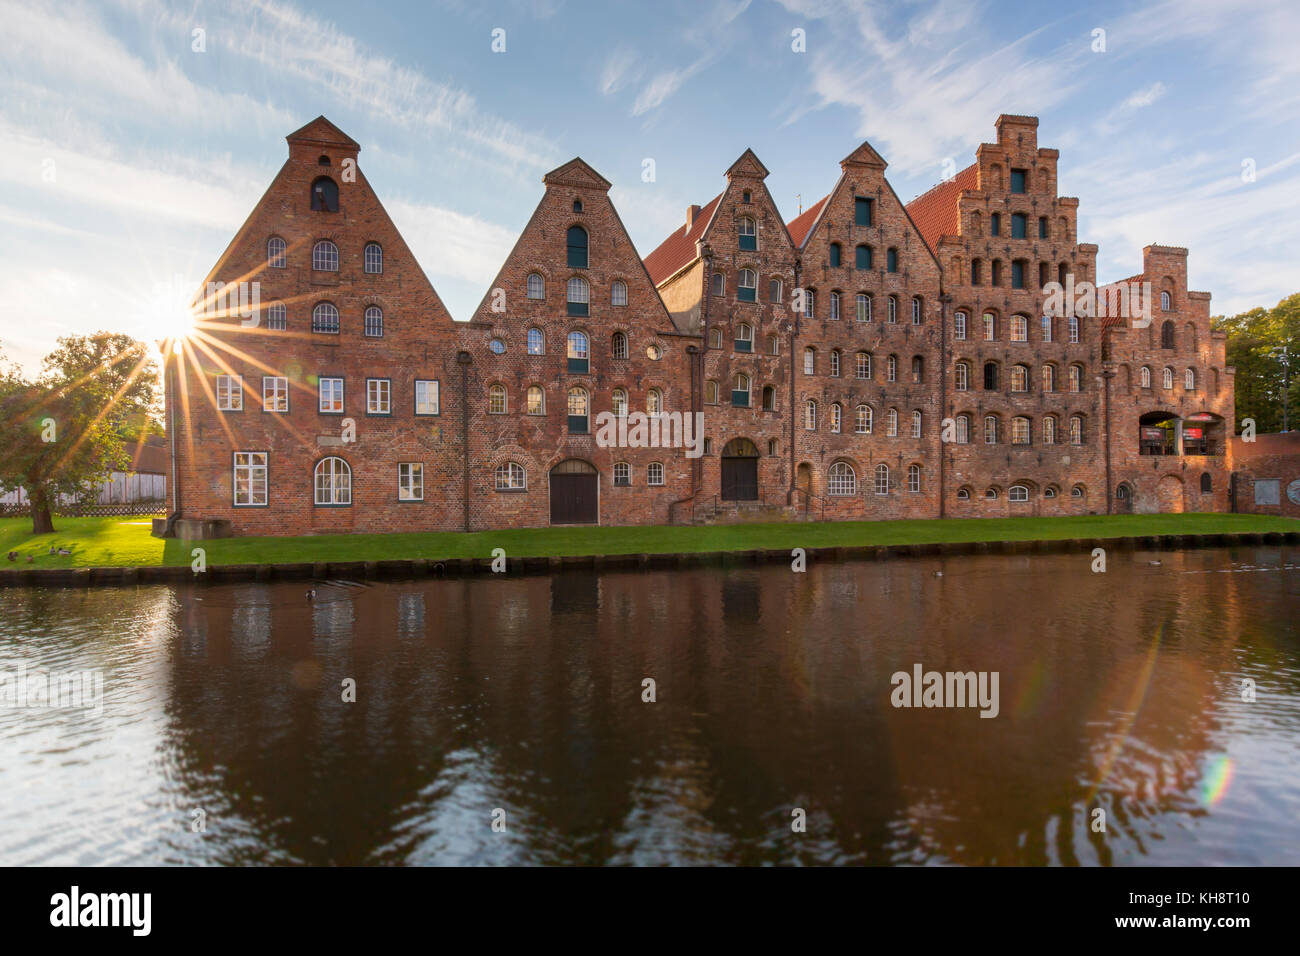 Salzspeicher / salt storehouses along the Upper Trave River in the Hanseatic town Lübeck / Luebeck, Schleswig-Holstein, Germany Stock Photo